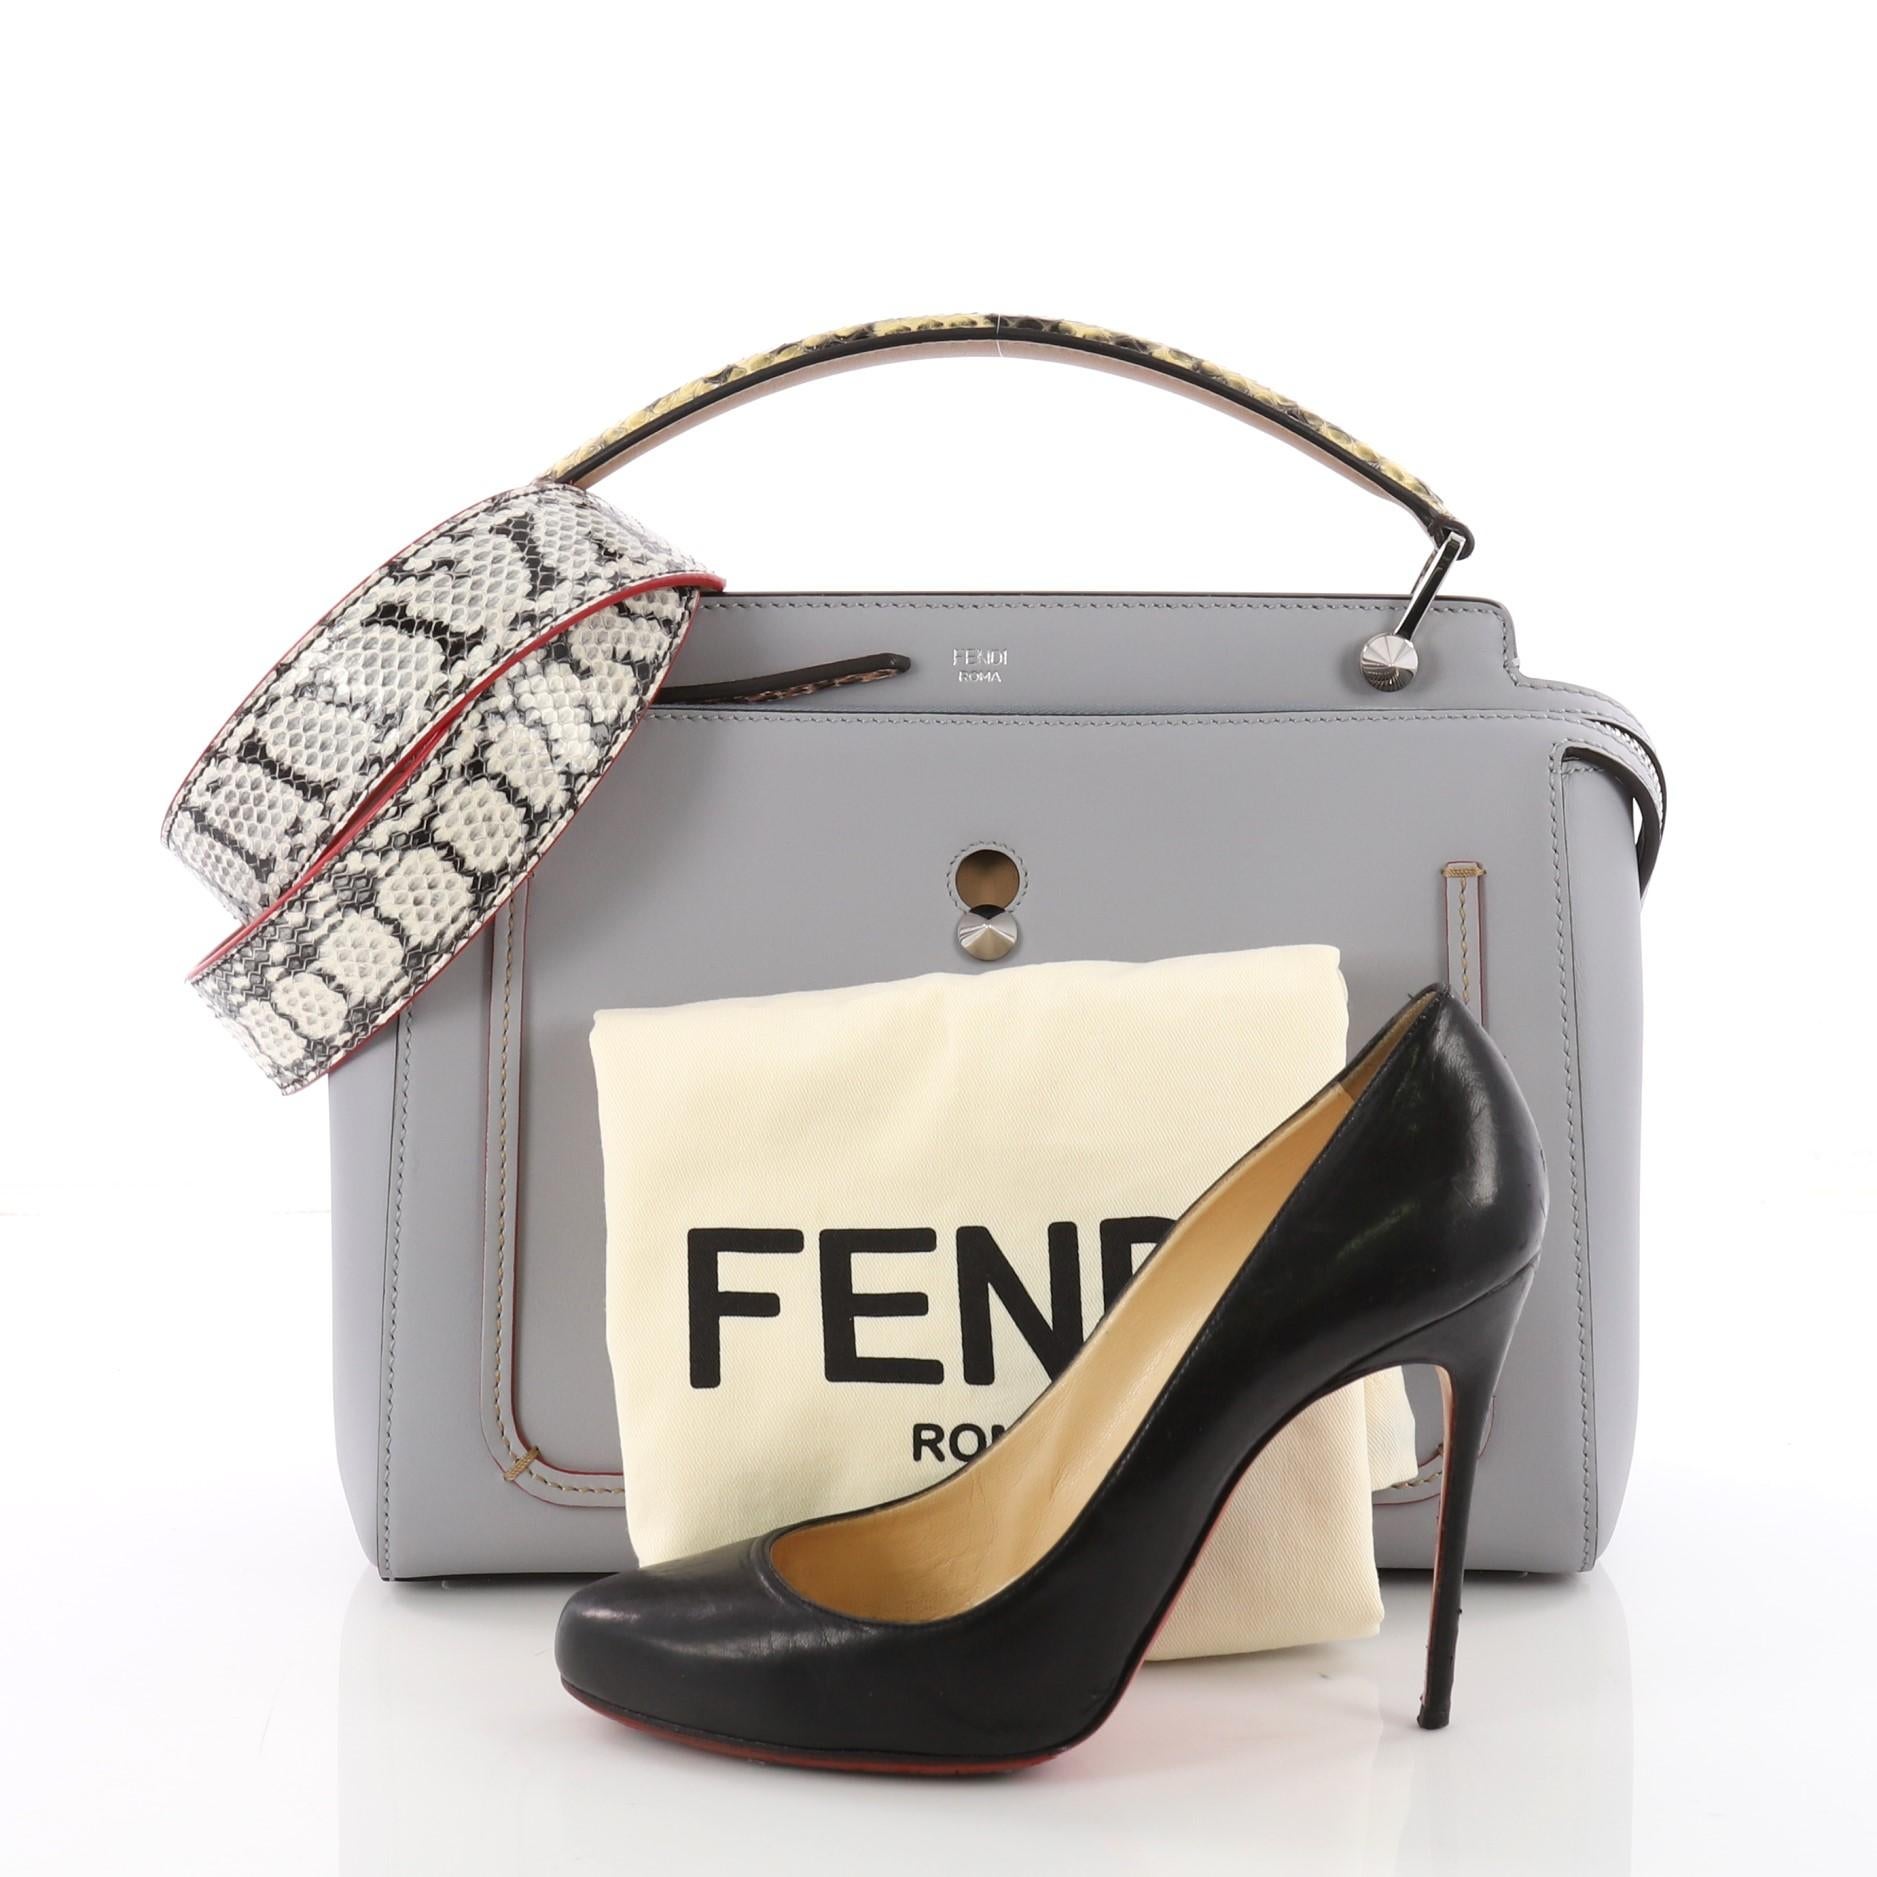 This Fendi DotCom Convertible Satchel Leather with Elaphe Medium, crafted from light blue leather with elaphe, features a flat top handle, distinctive conical stud embellishment, Fendi Roma logo, and silver-tone hardware. Its extended zip closure